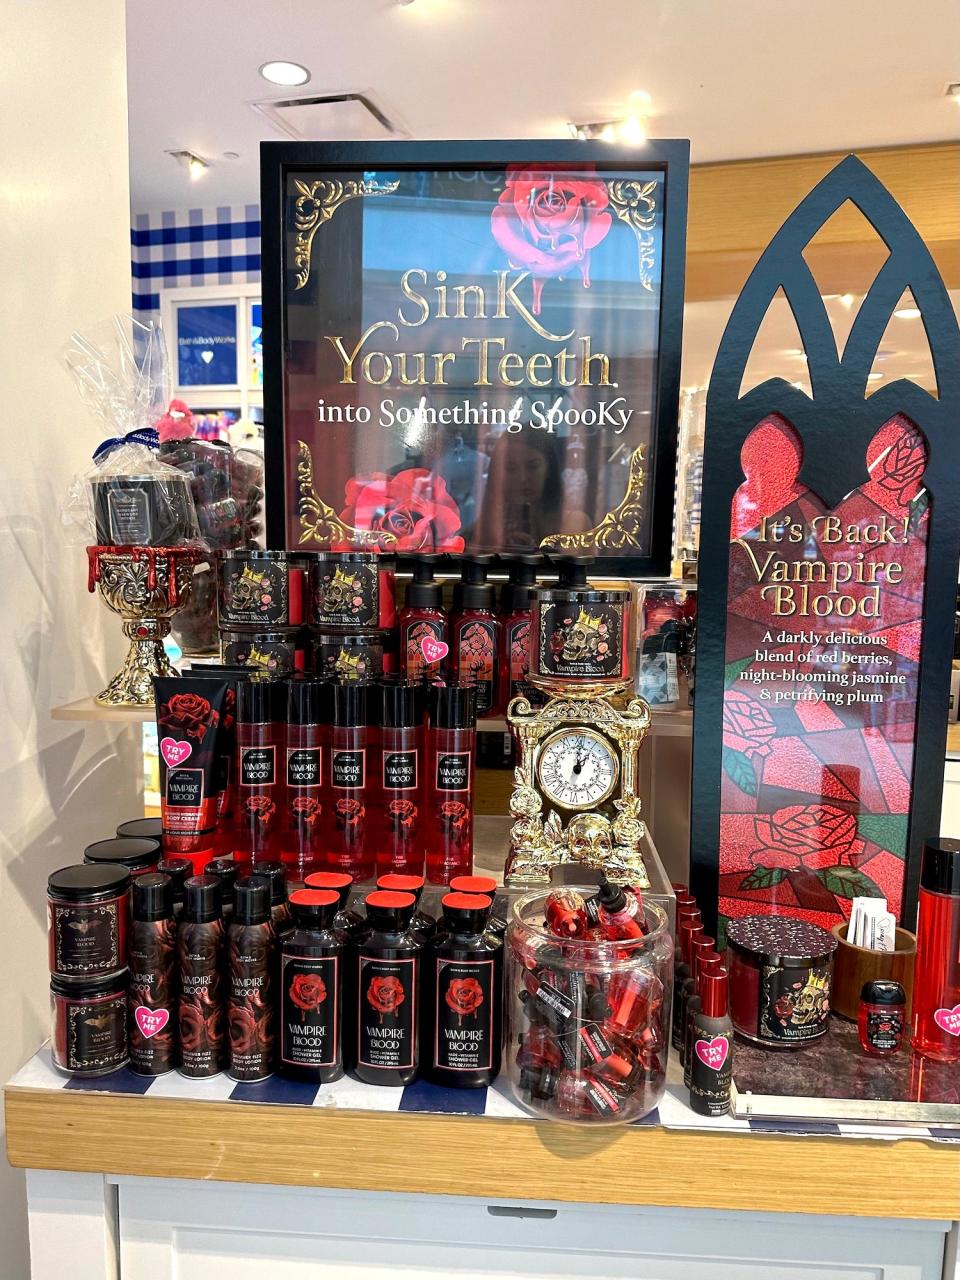 The Vampire Blood line from Bath & Body Works.